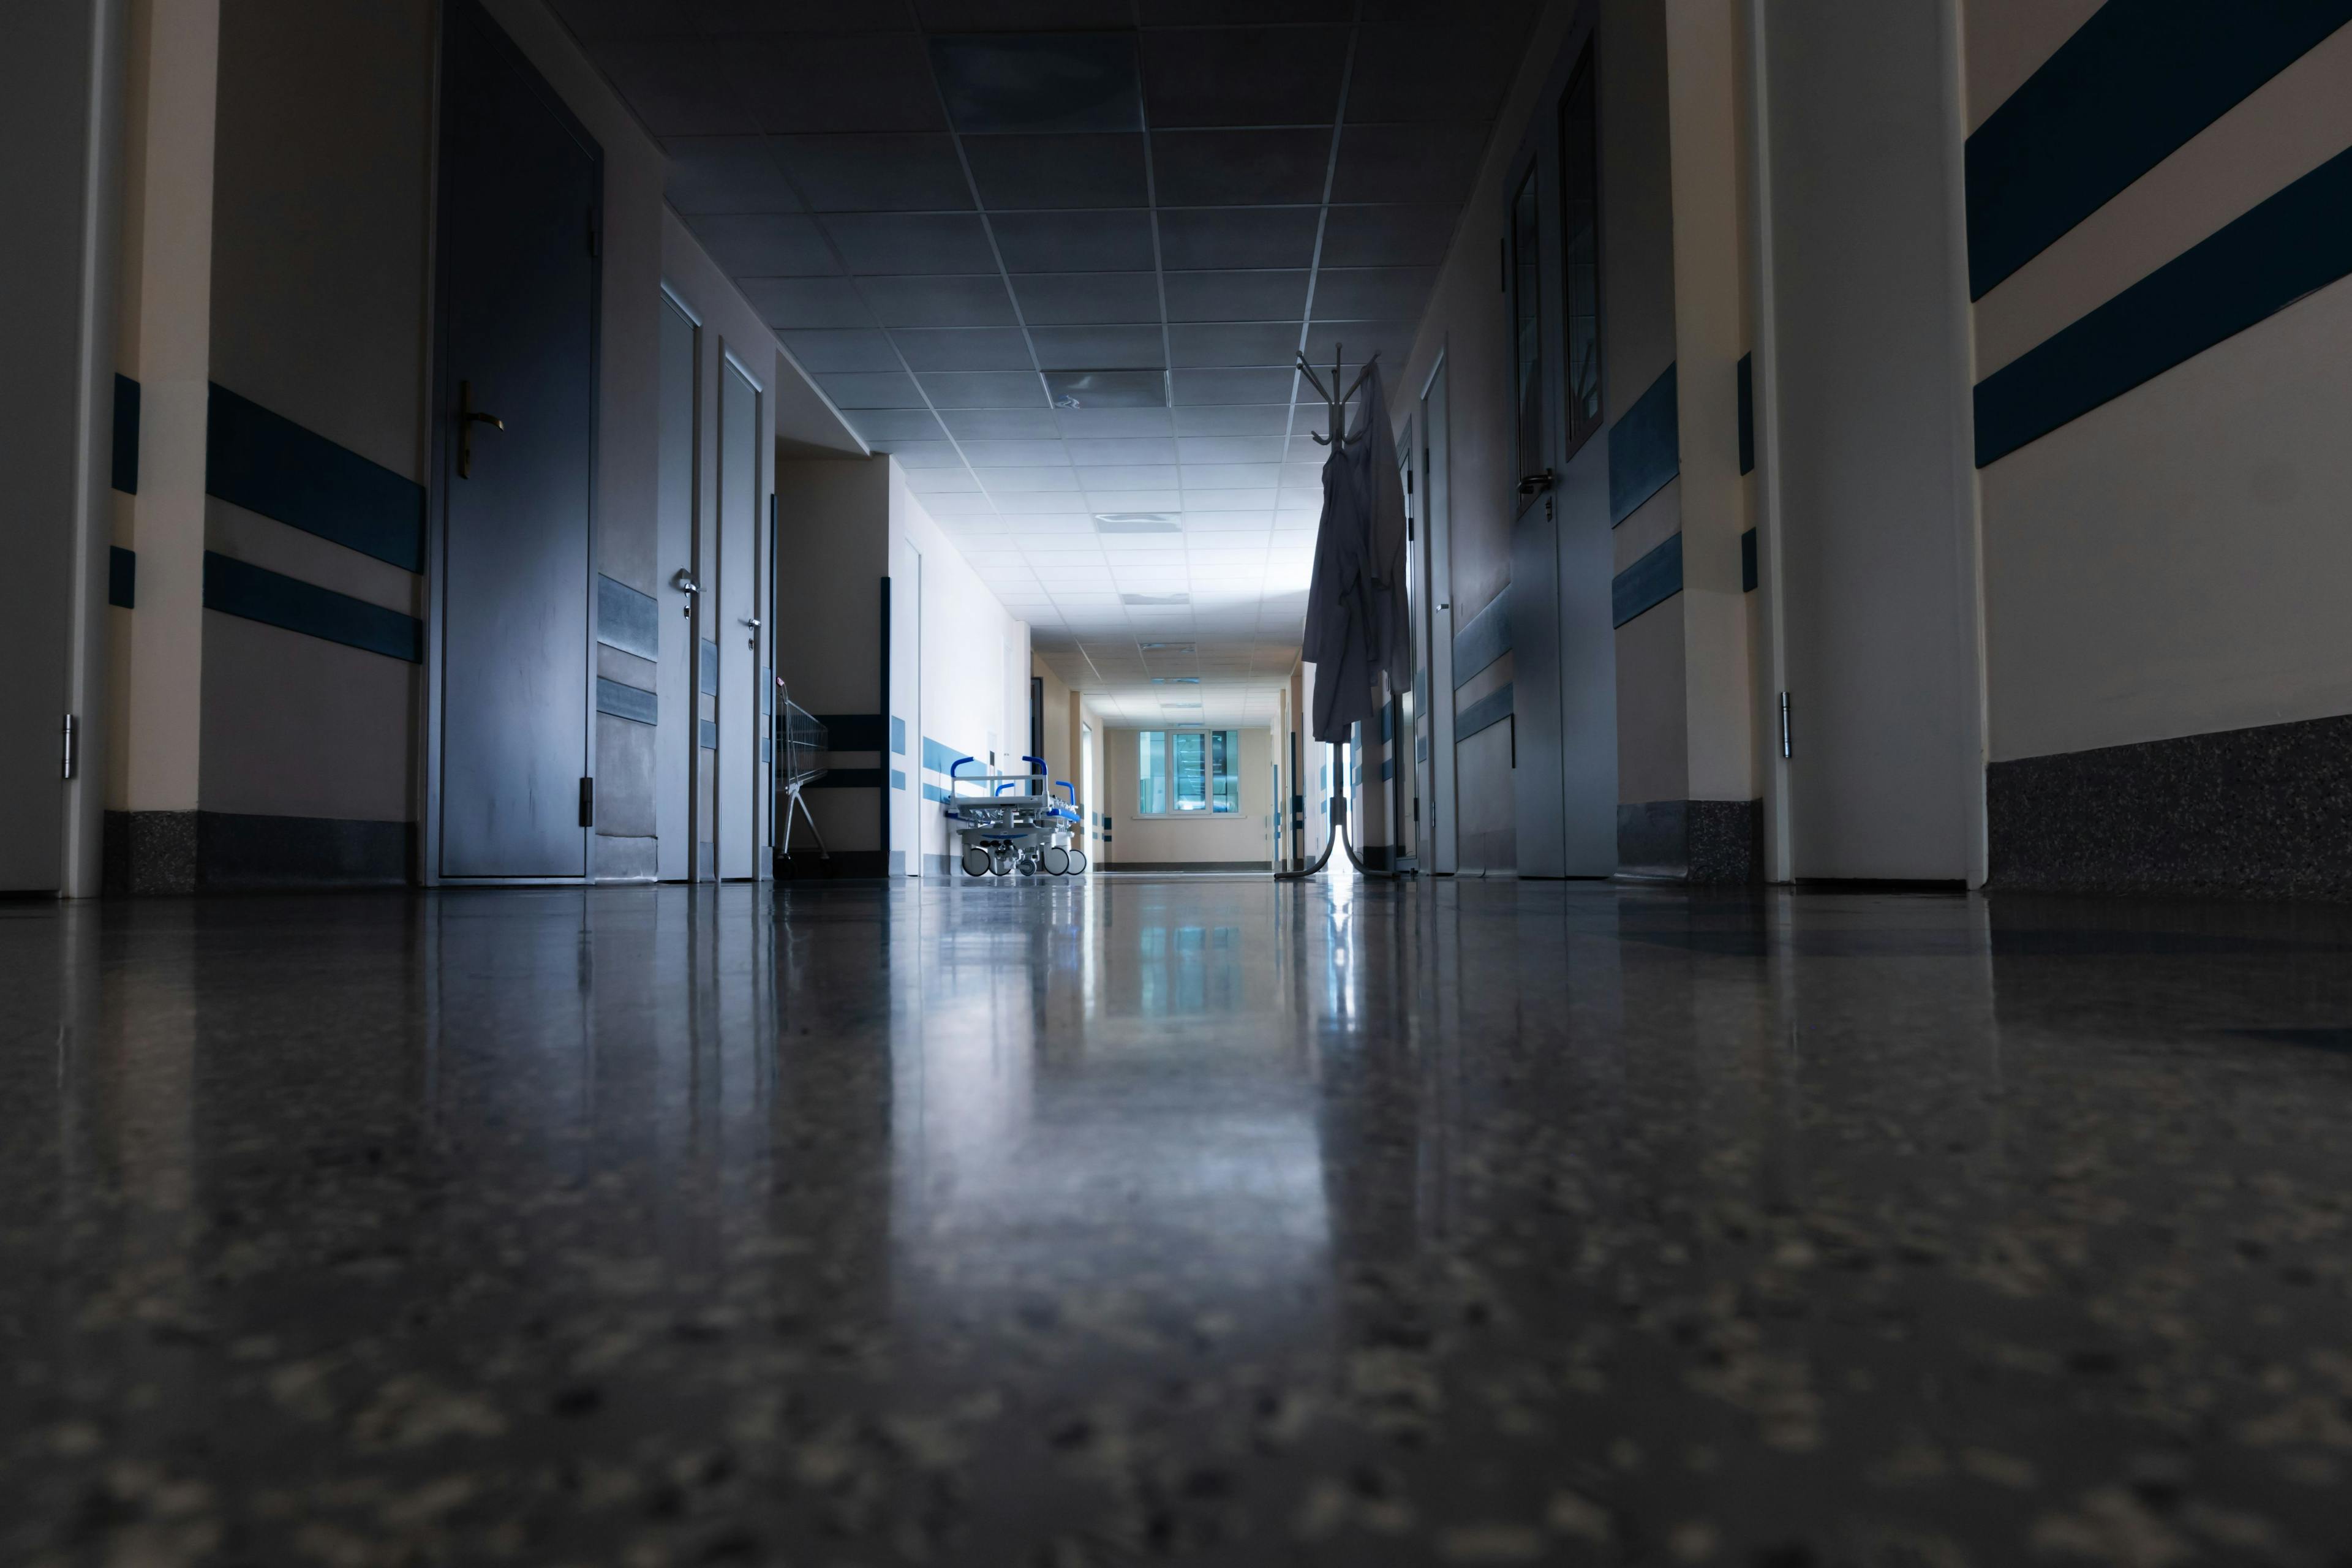 Threats and harassment: 24 hospitals targeted for providing gender-affirming care